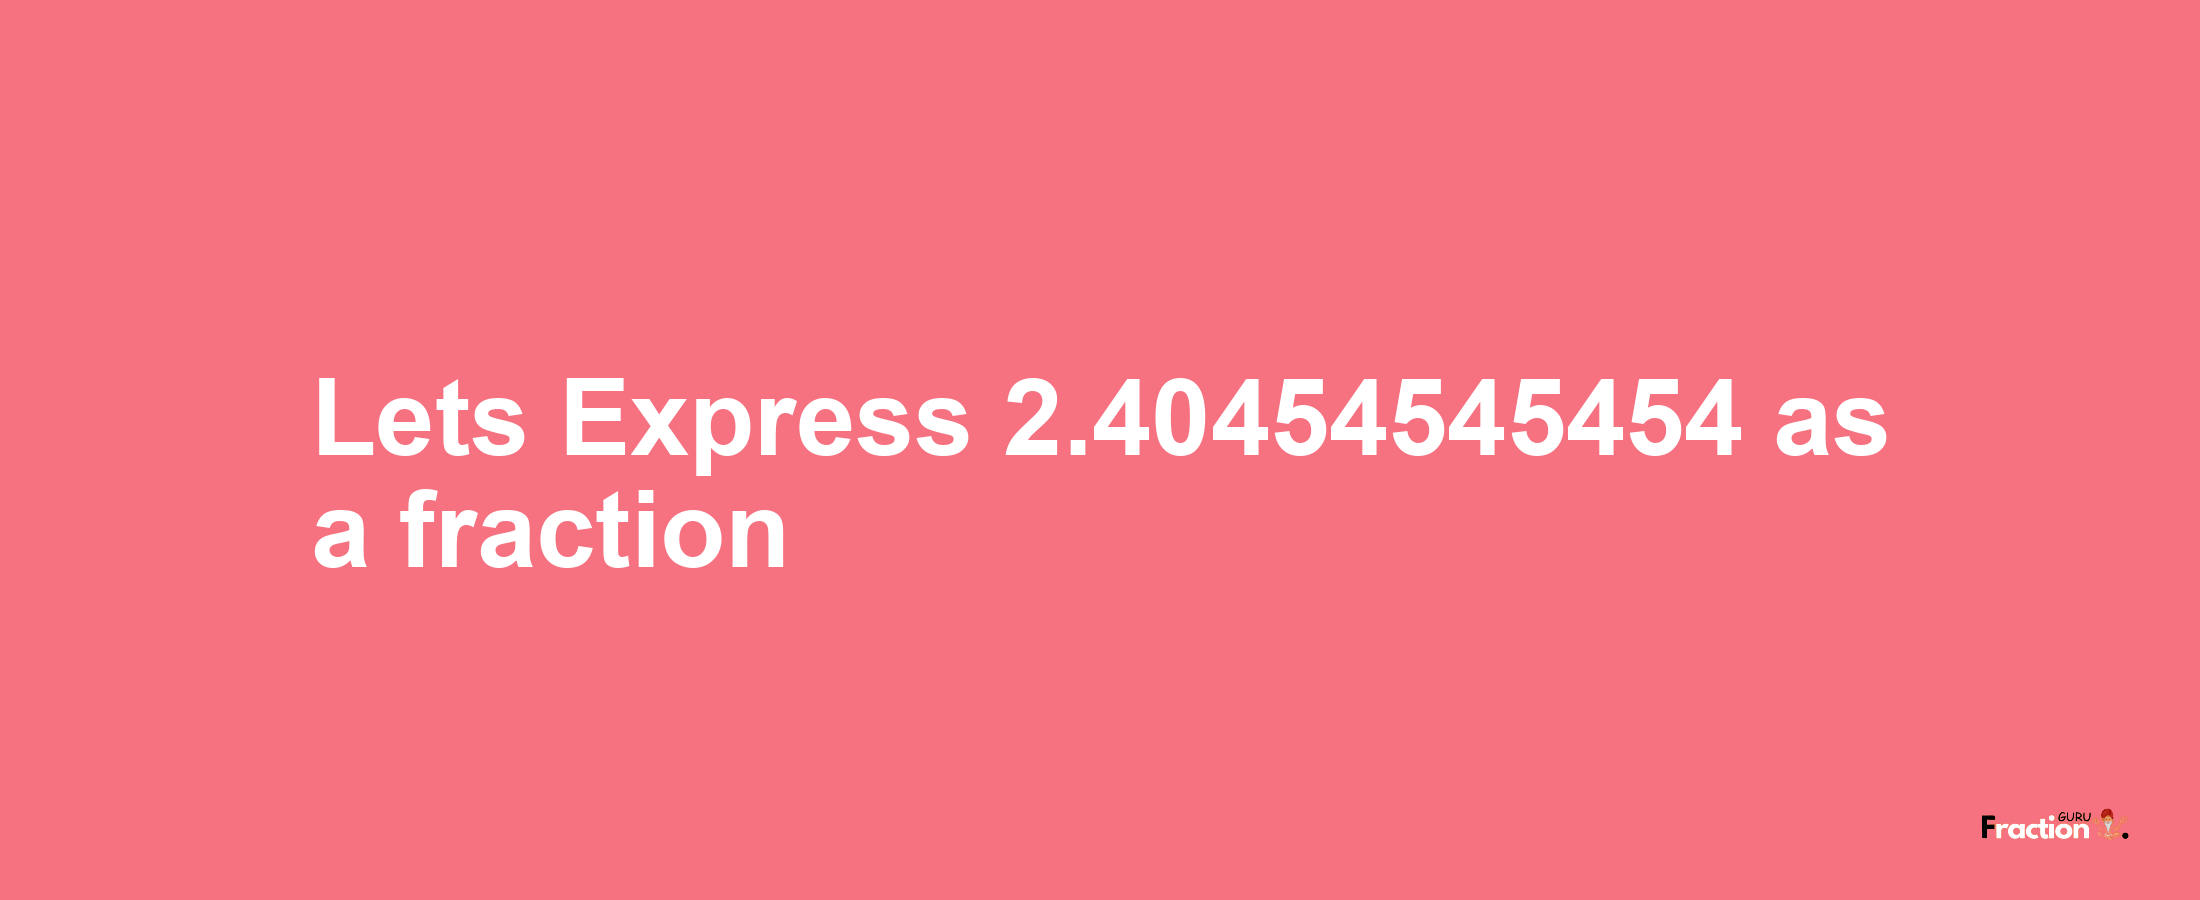 Lets Express 2.40454545454 as afraction